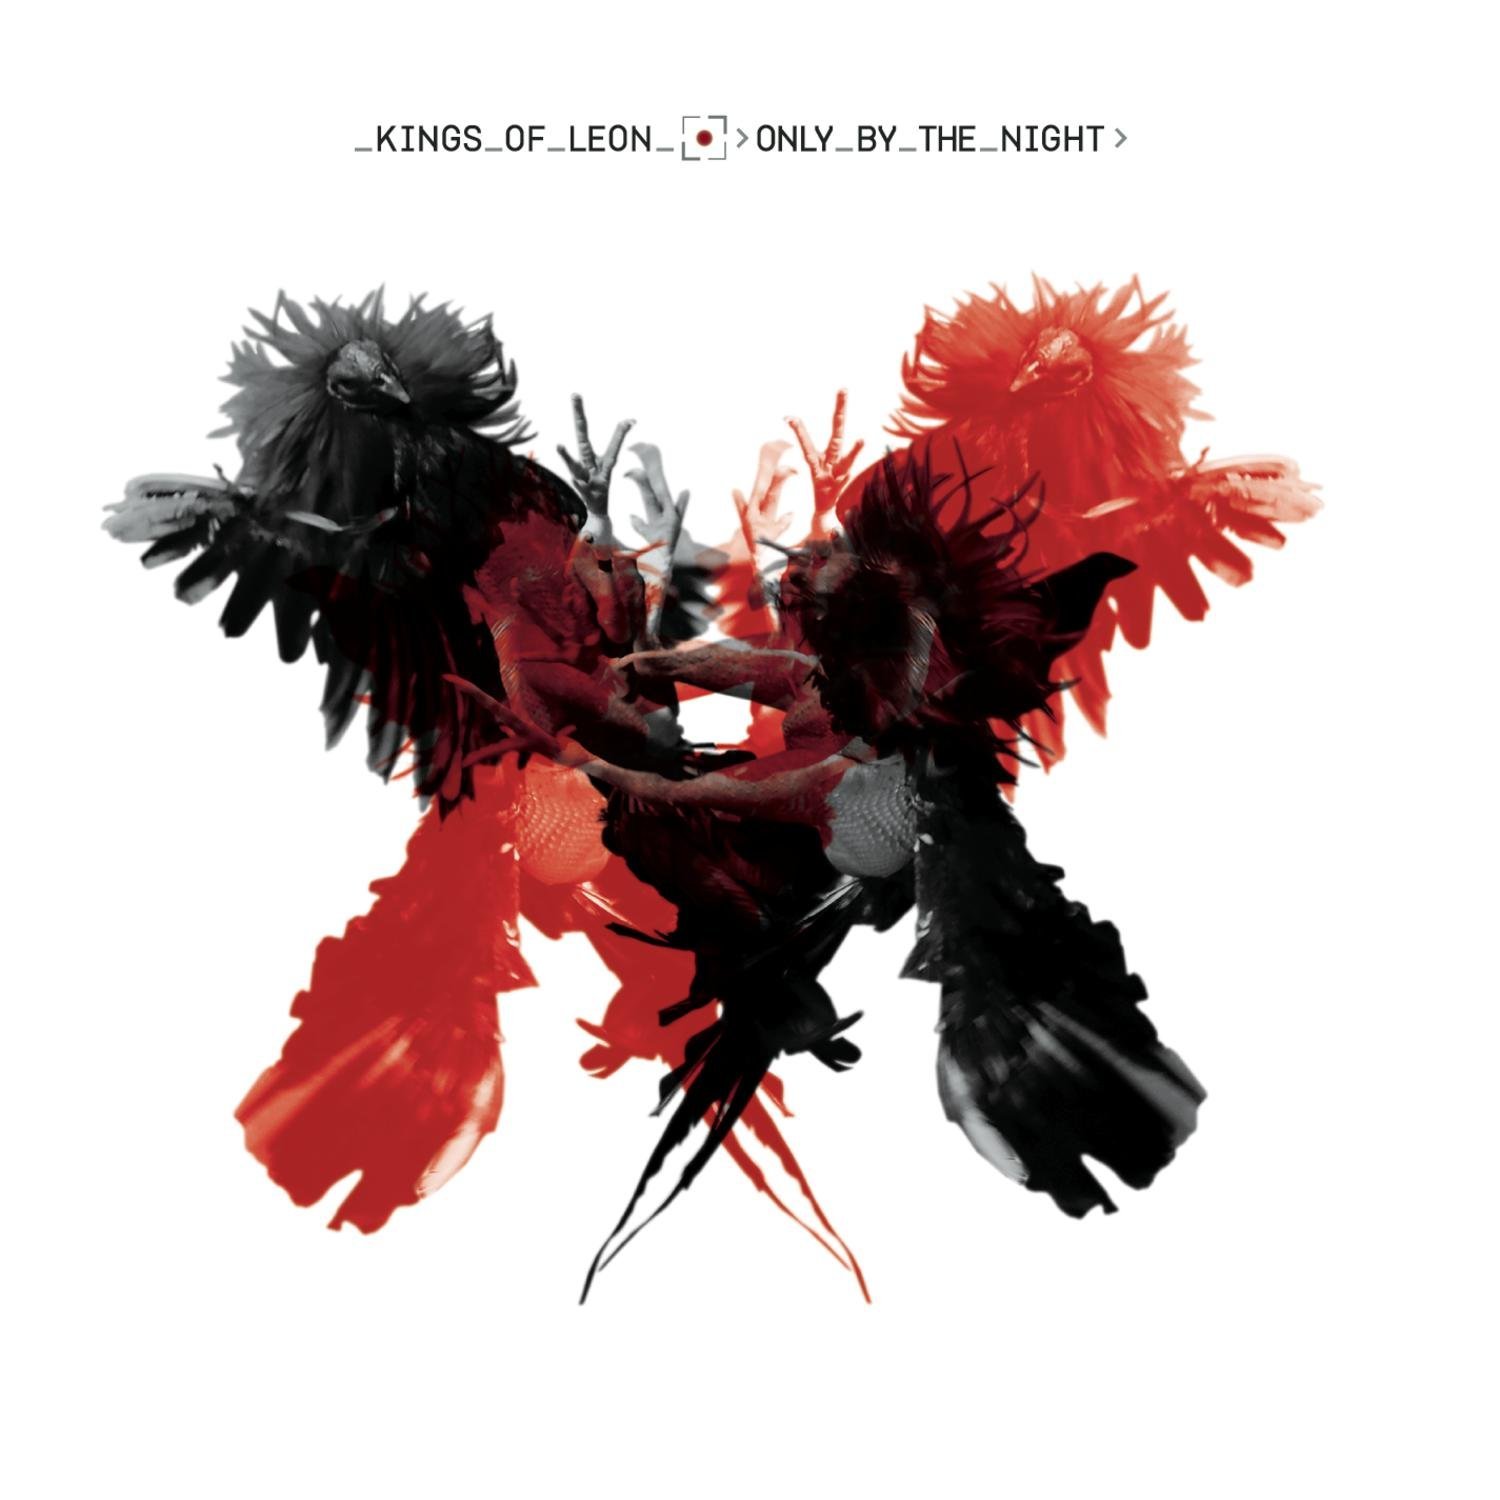 Kings of leon only by the night album download zip